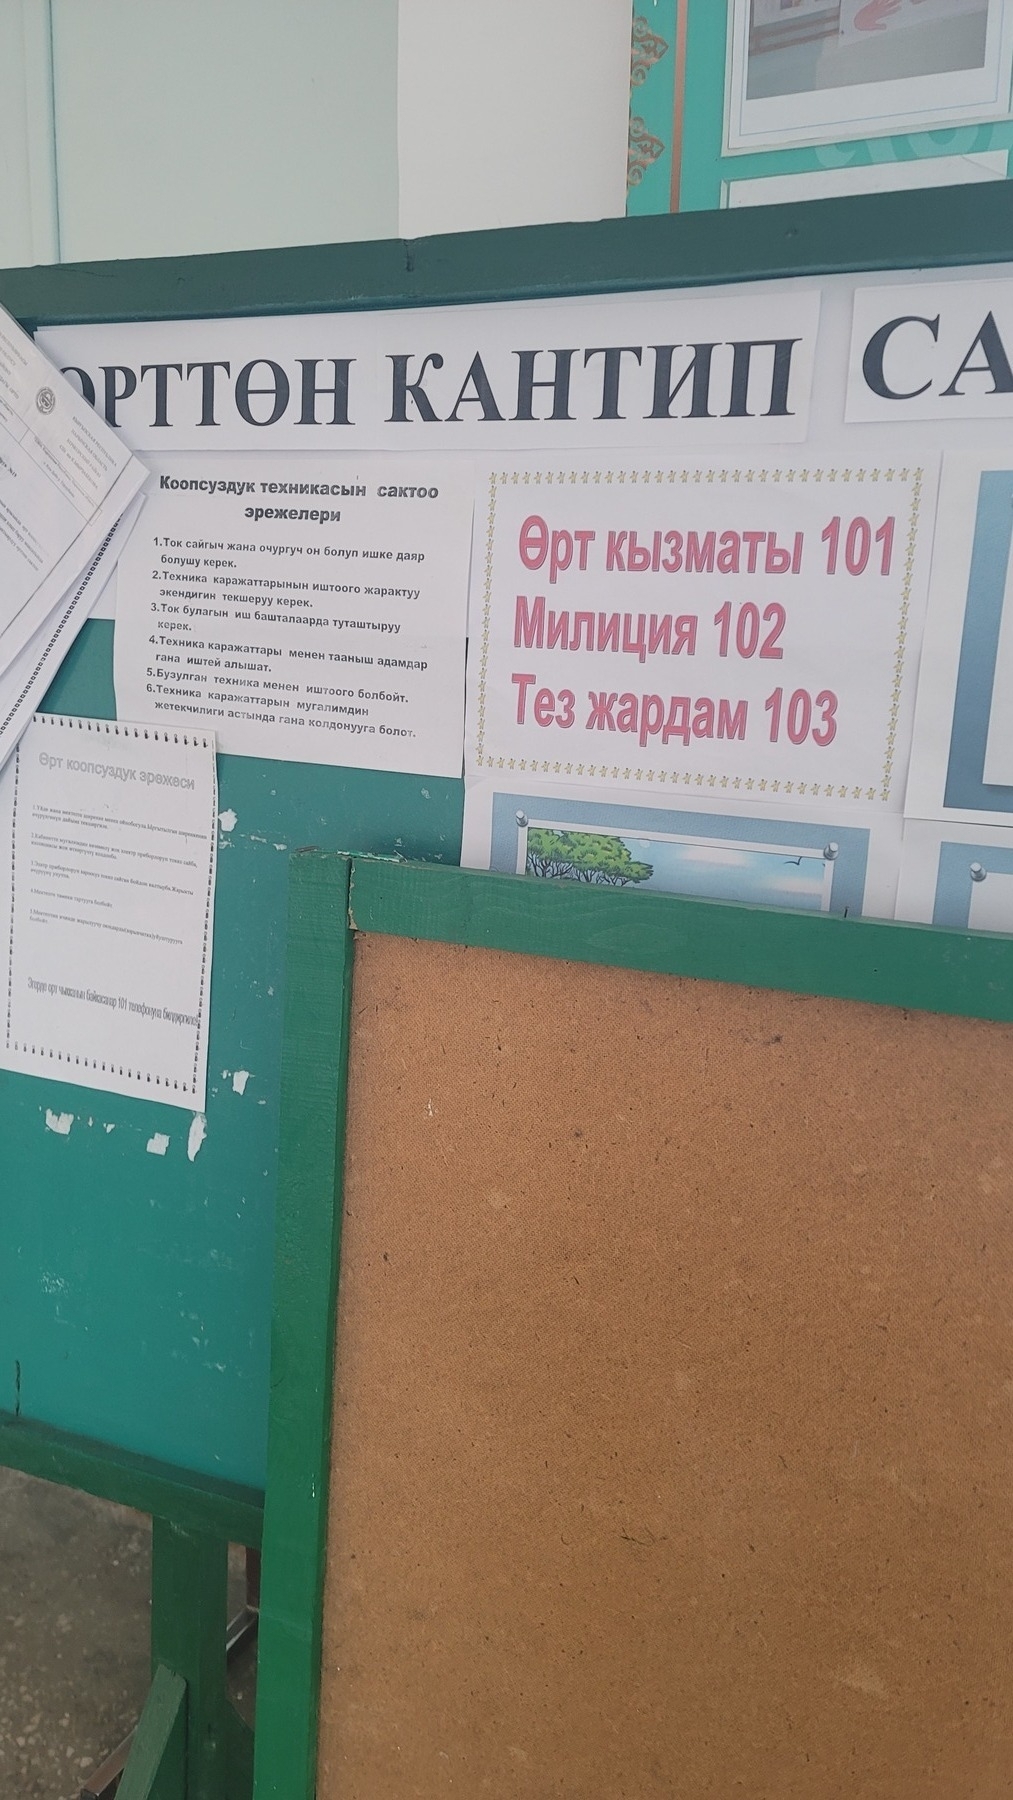 green bulletin board with several white papers with Kyrgyz text taped to it, including one with emergency number descriptions in red text